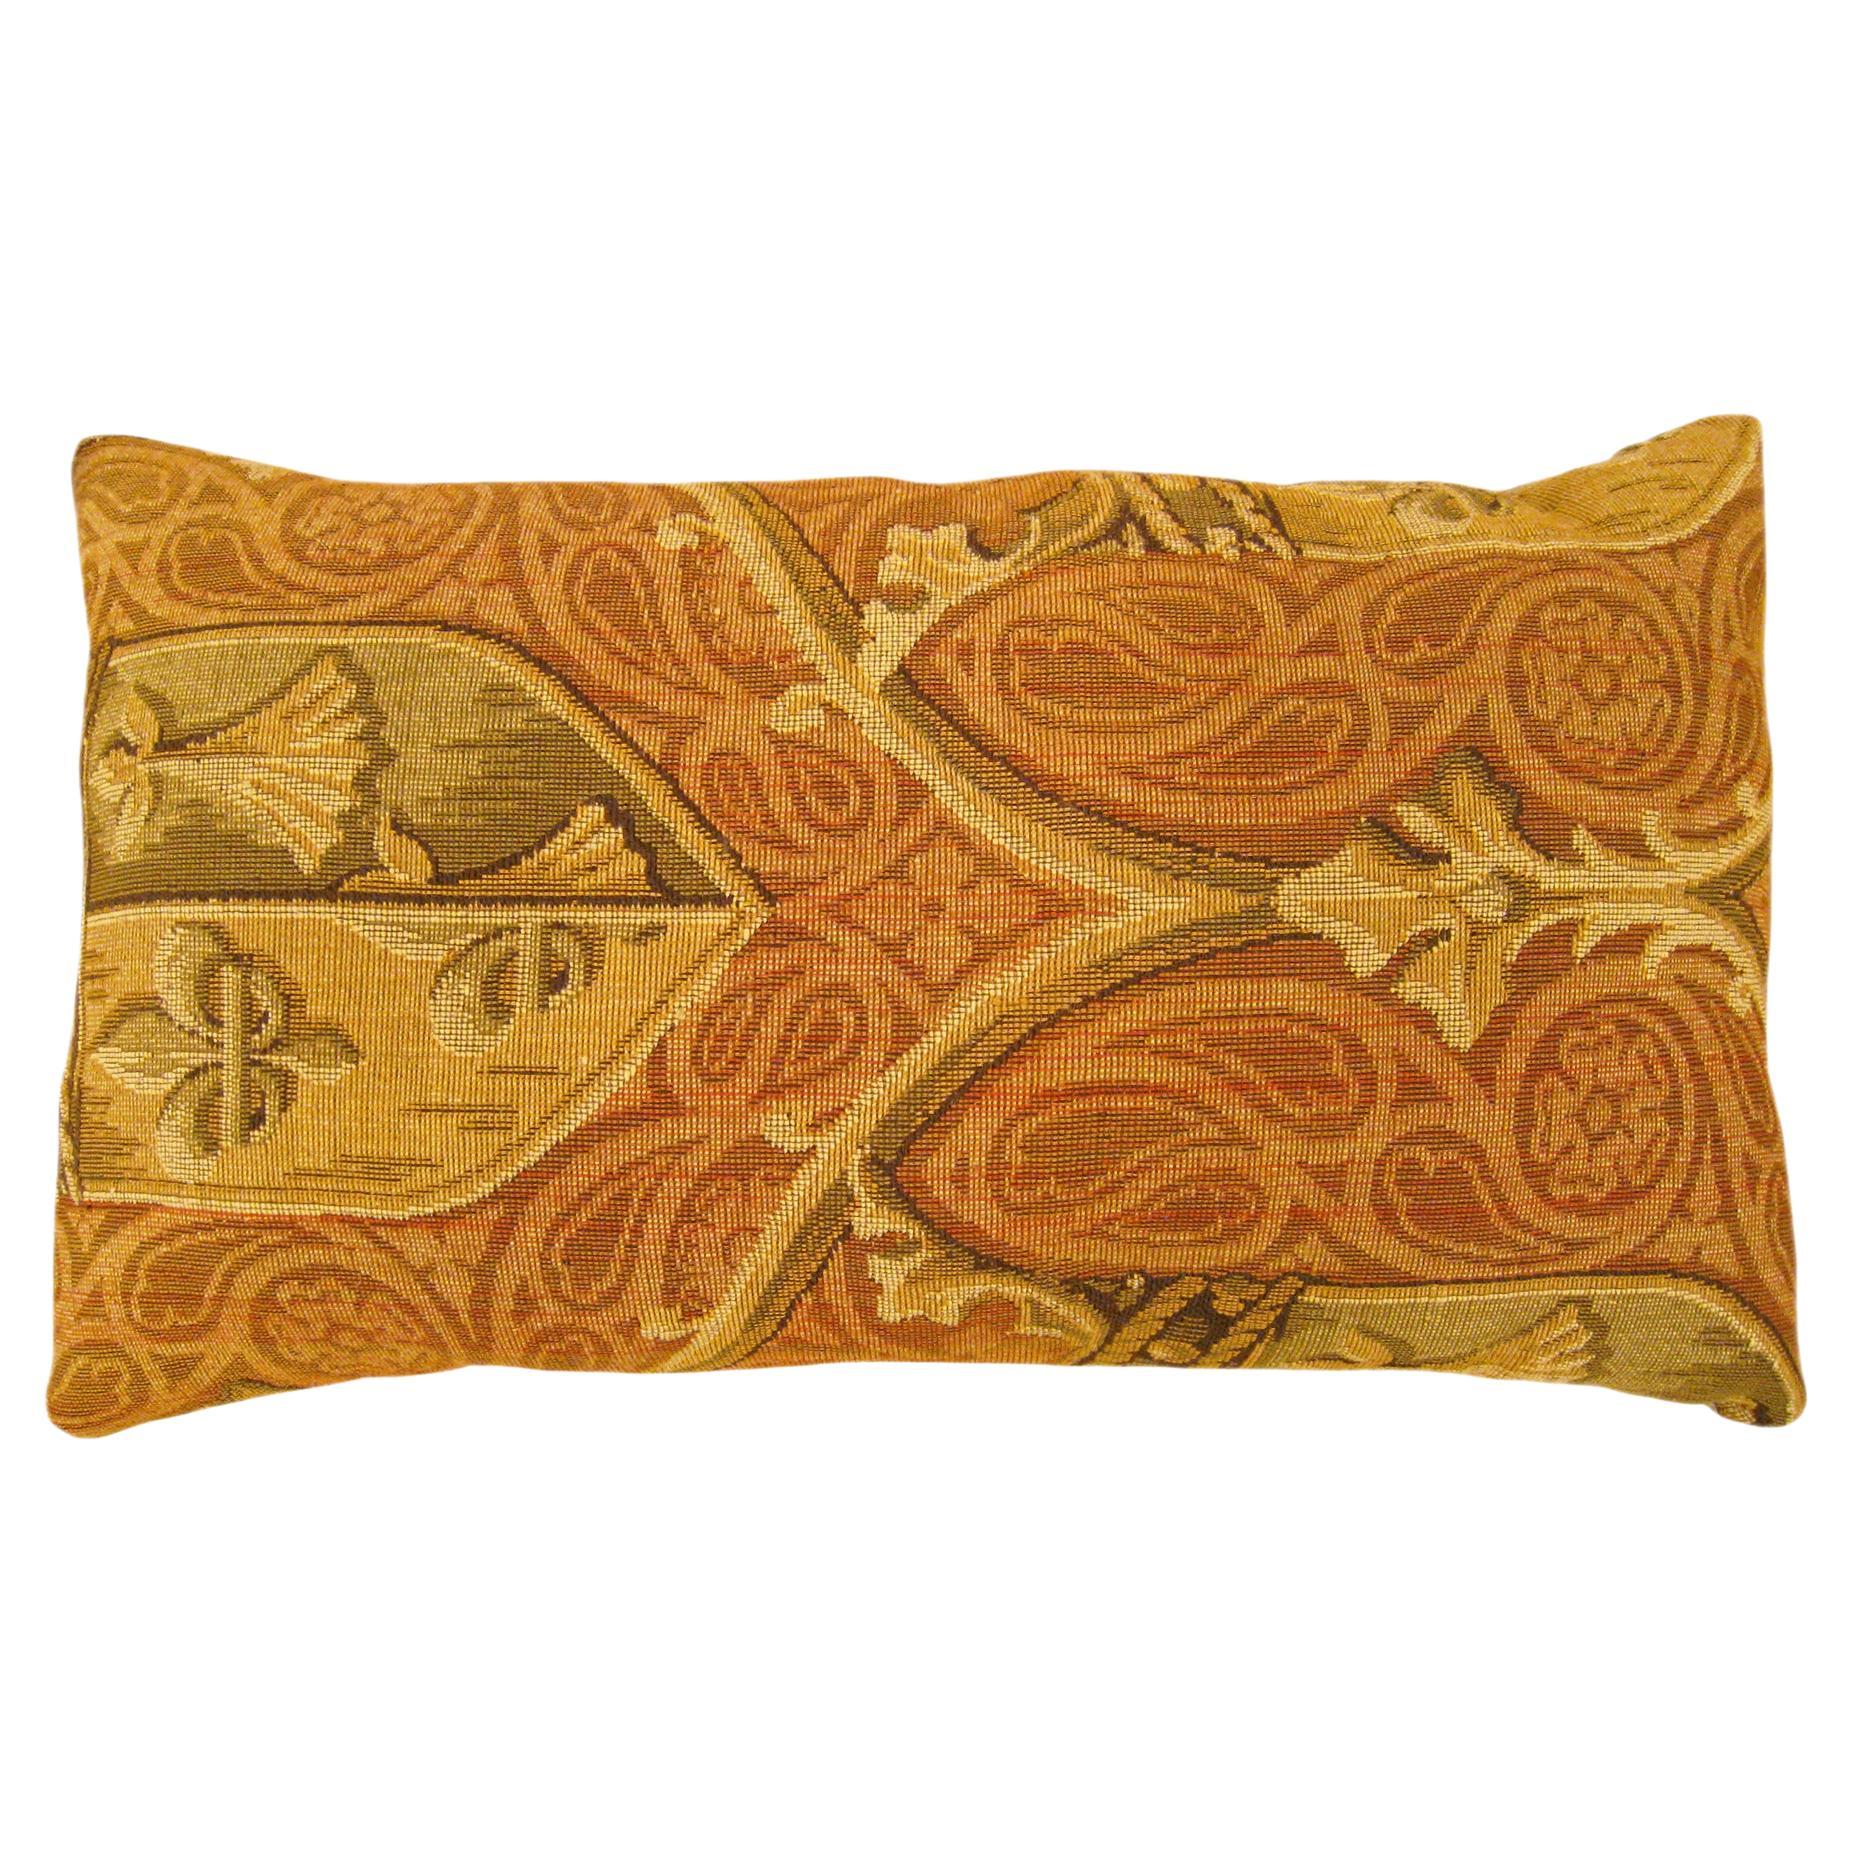 Decorative Antique Jacquard Tapestry Pillow with A Symmetrical Design Allover